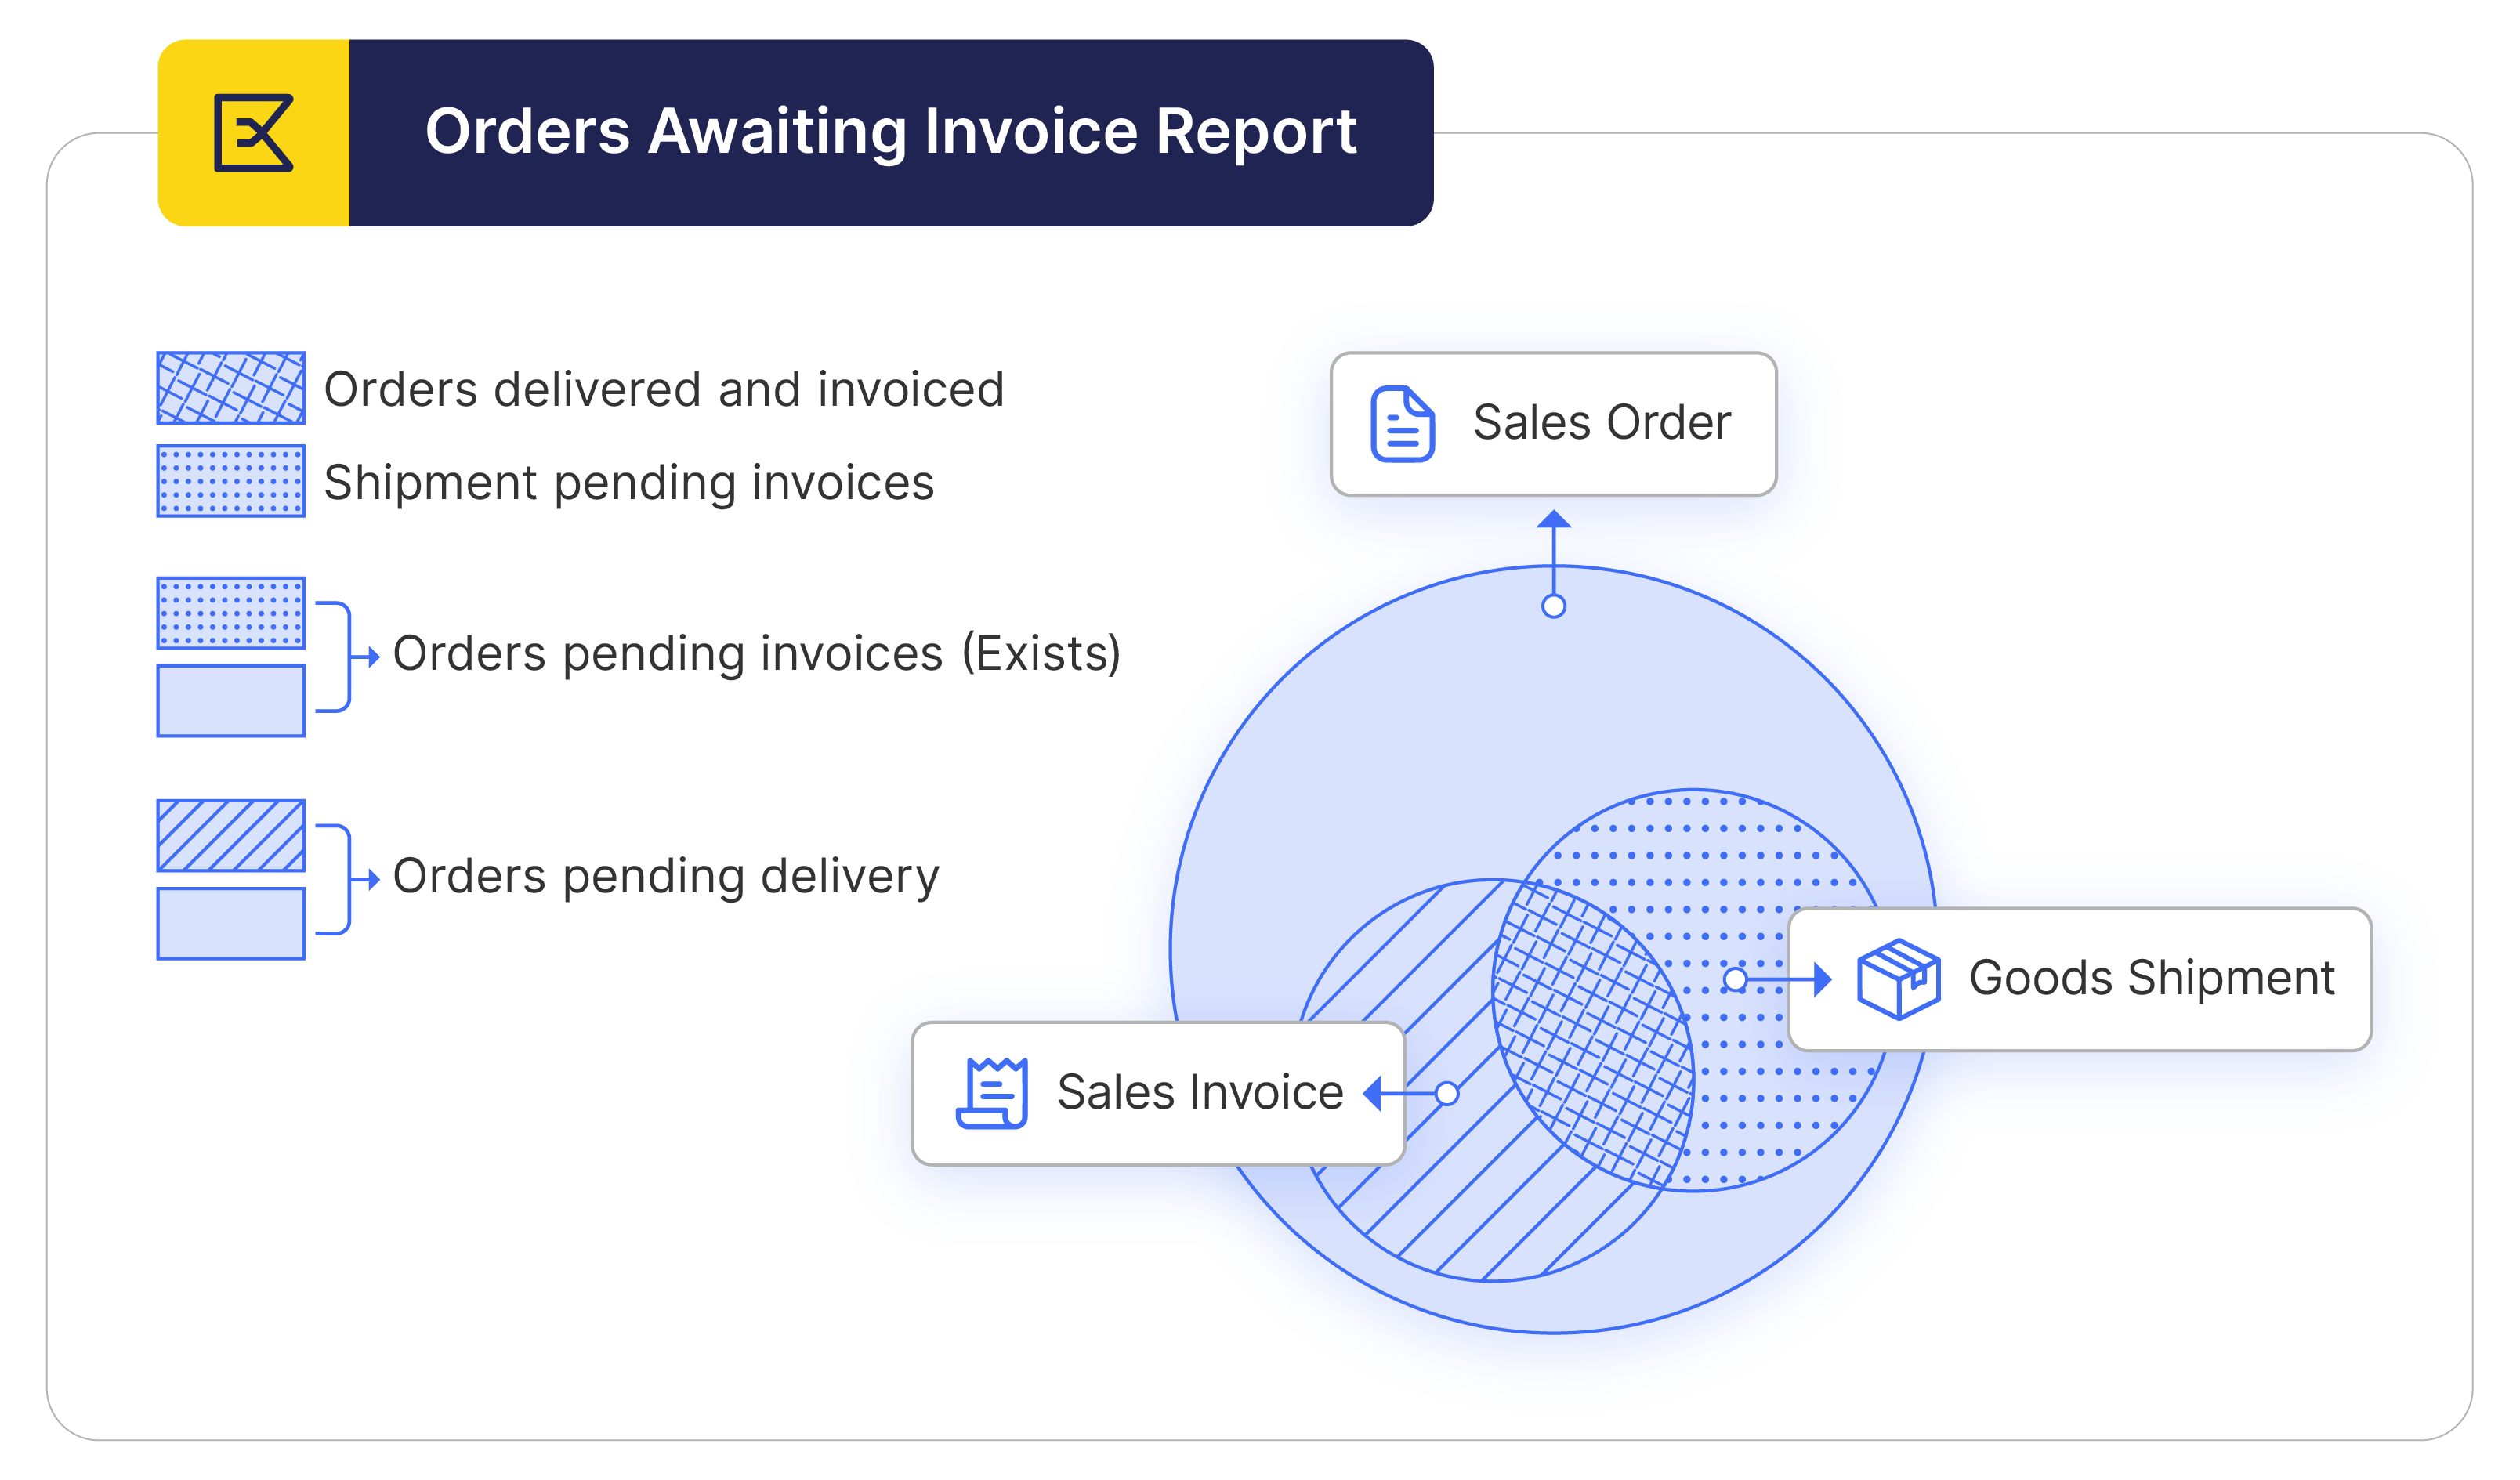 Orders Awaiting Invoice Report